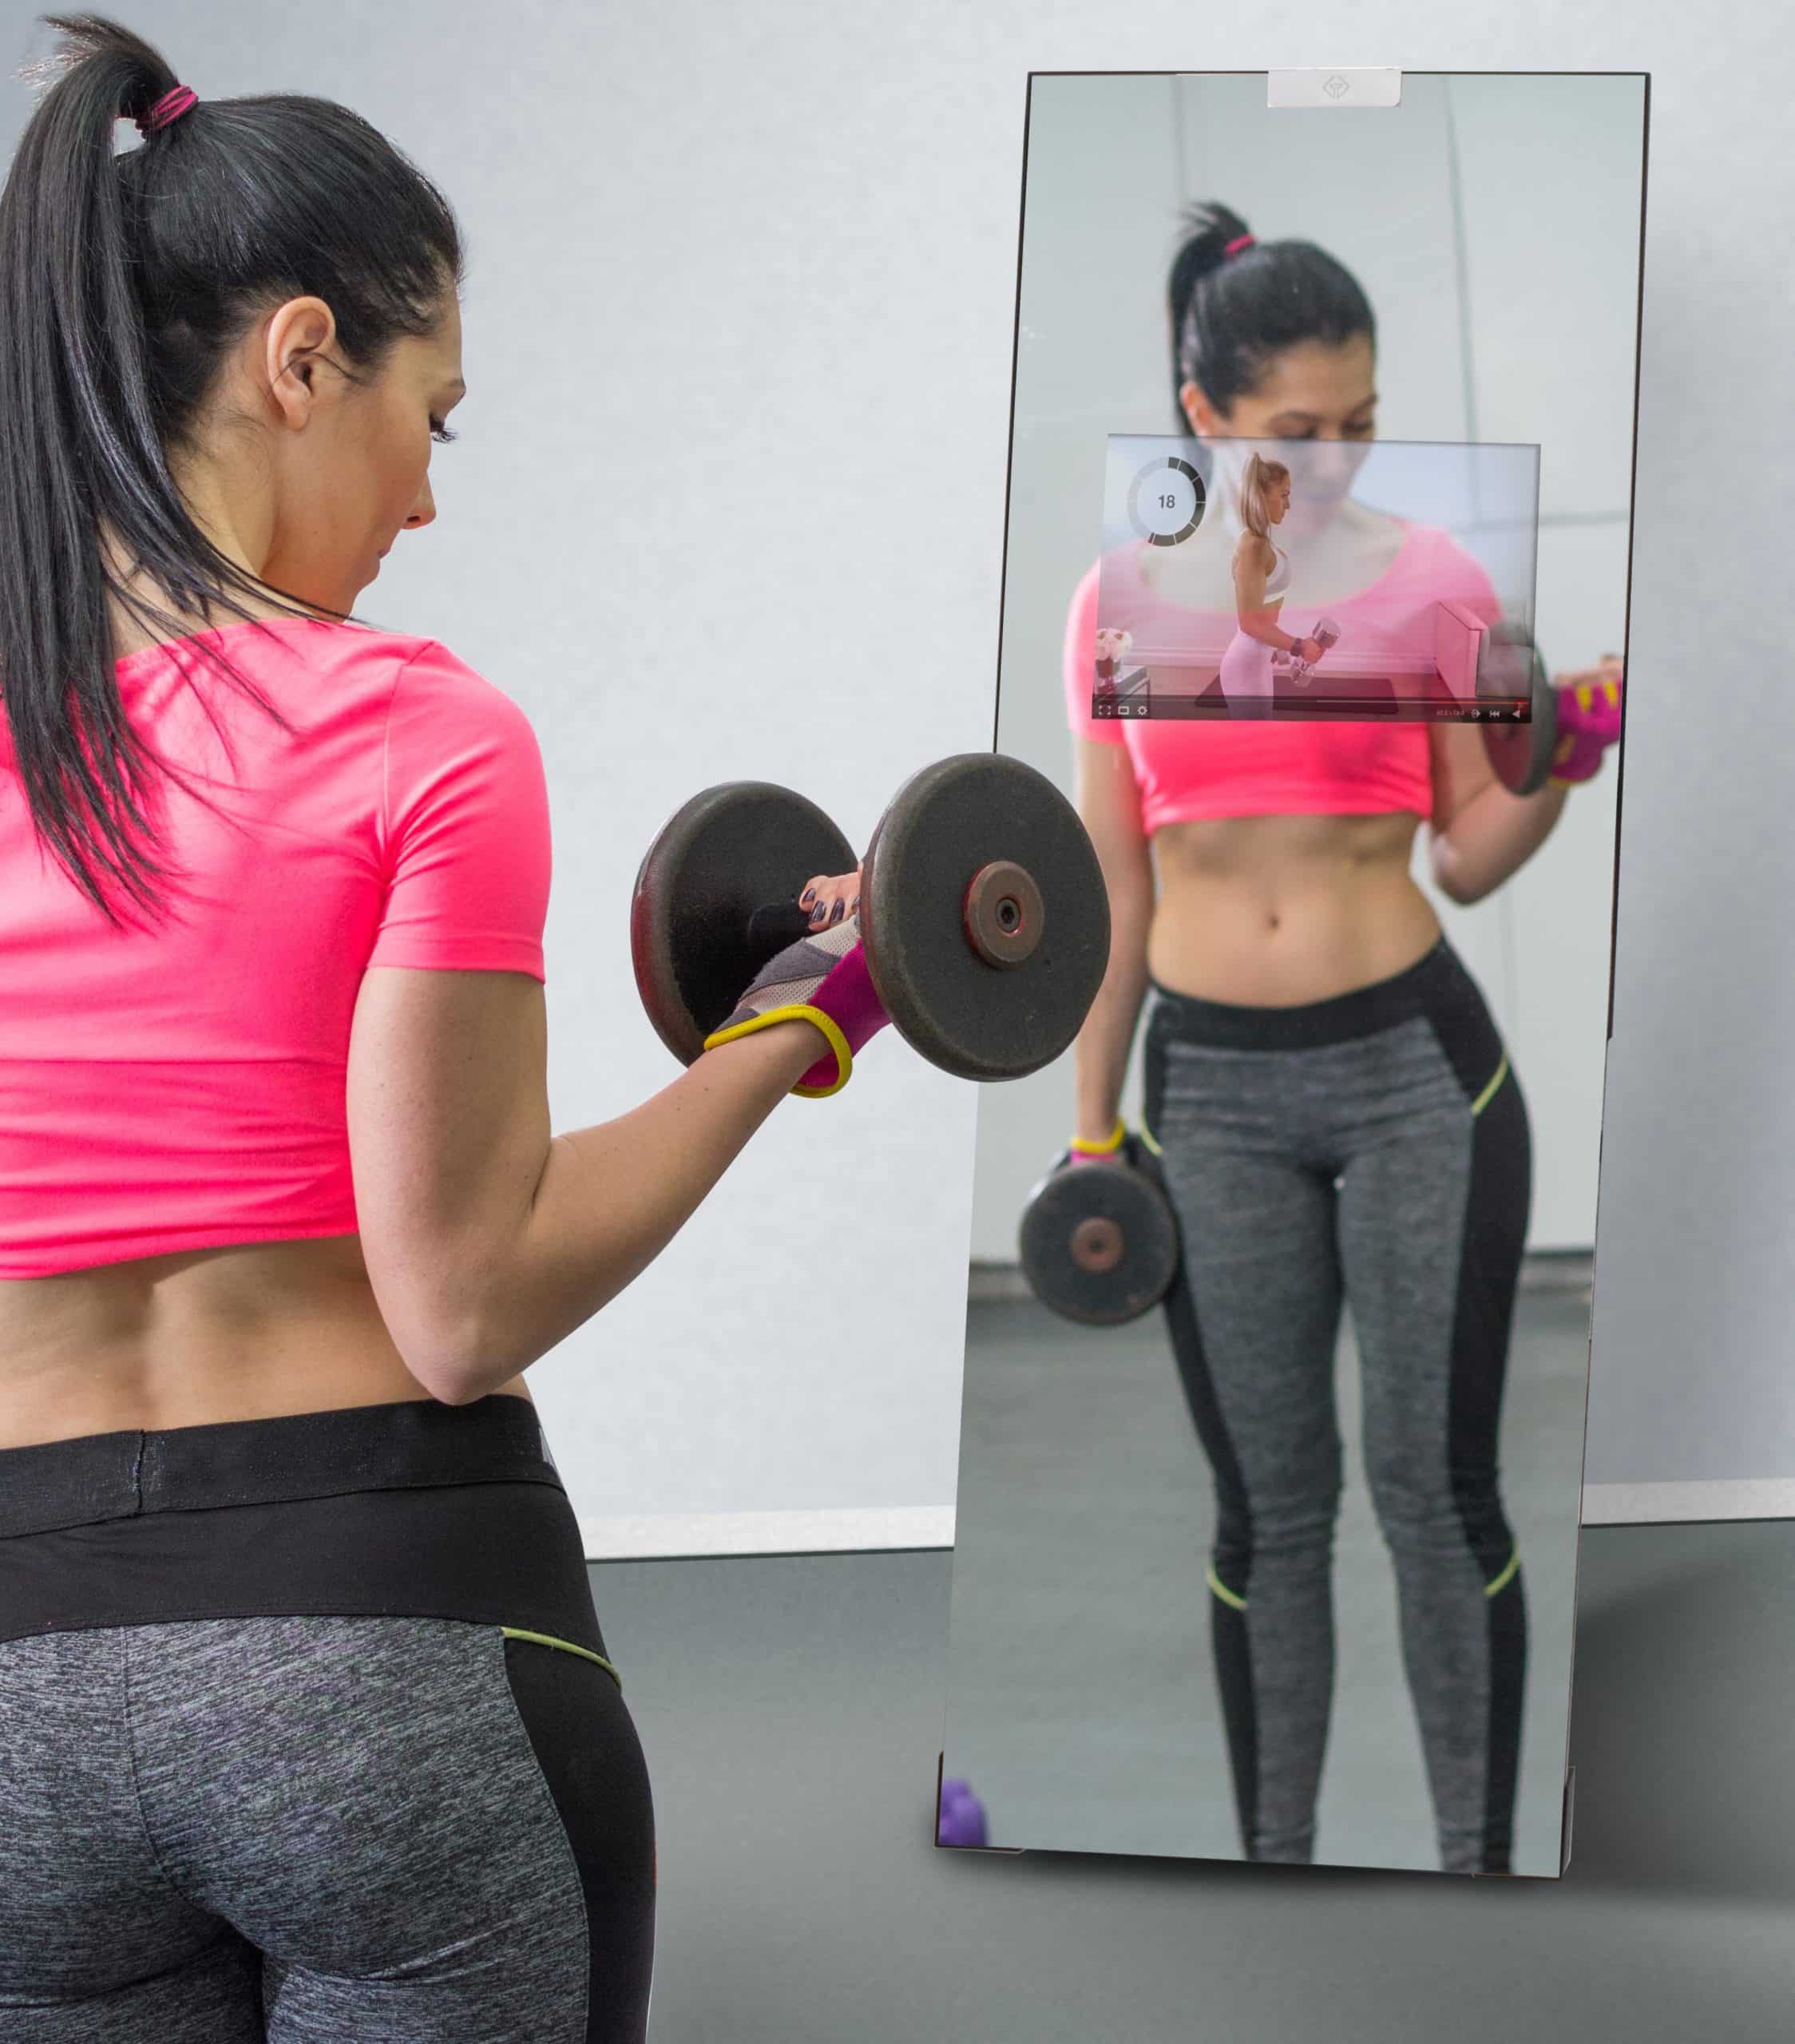 Ways You Can Use a Smart Mirror for Fitness